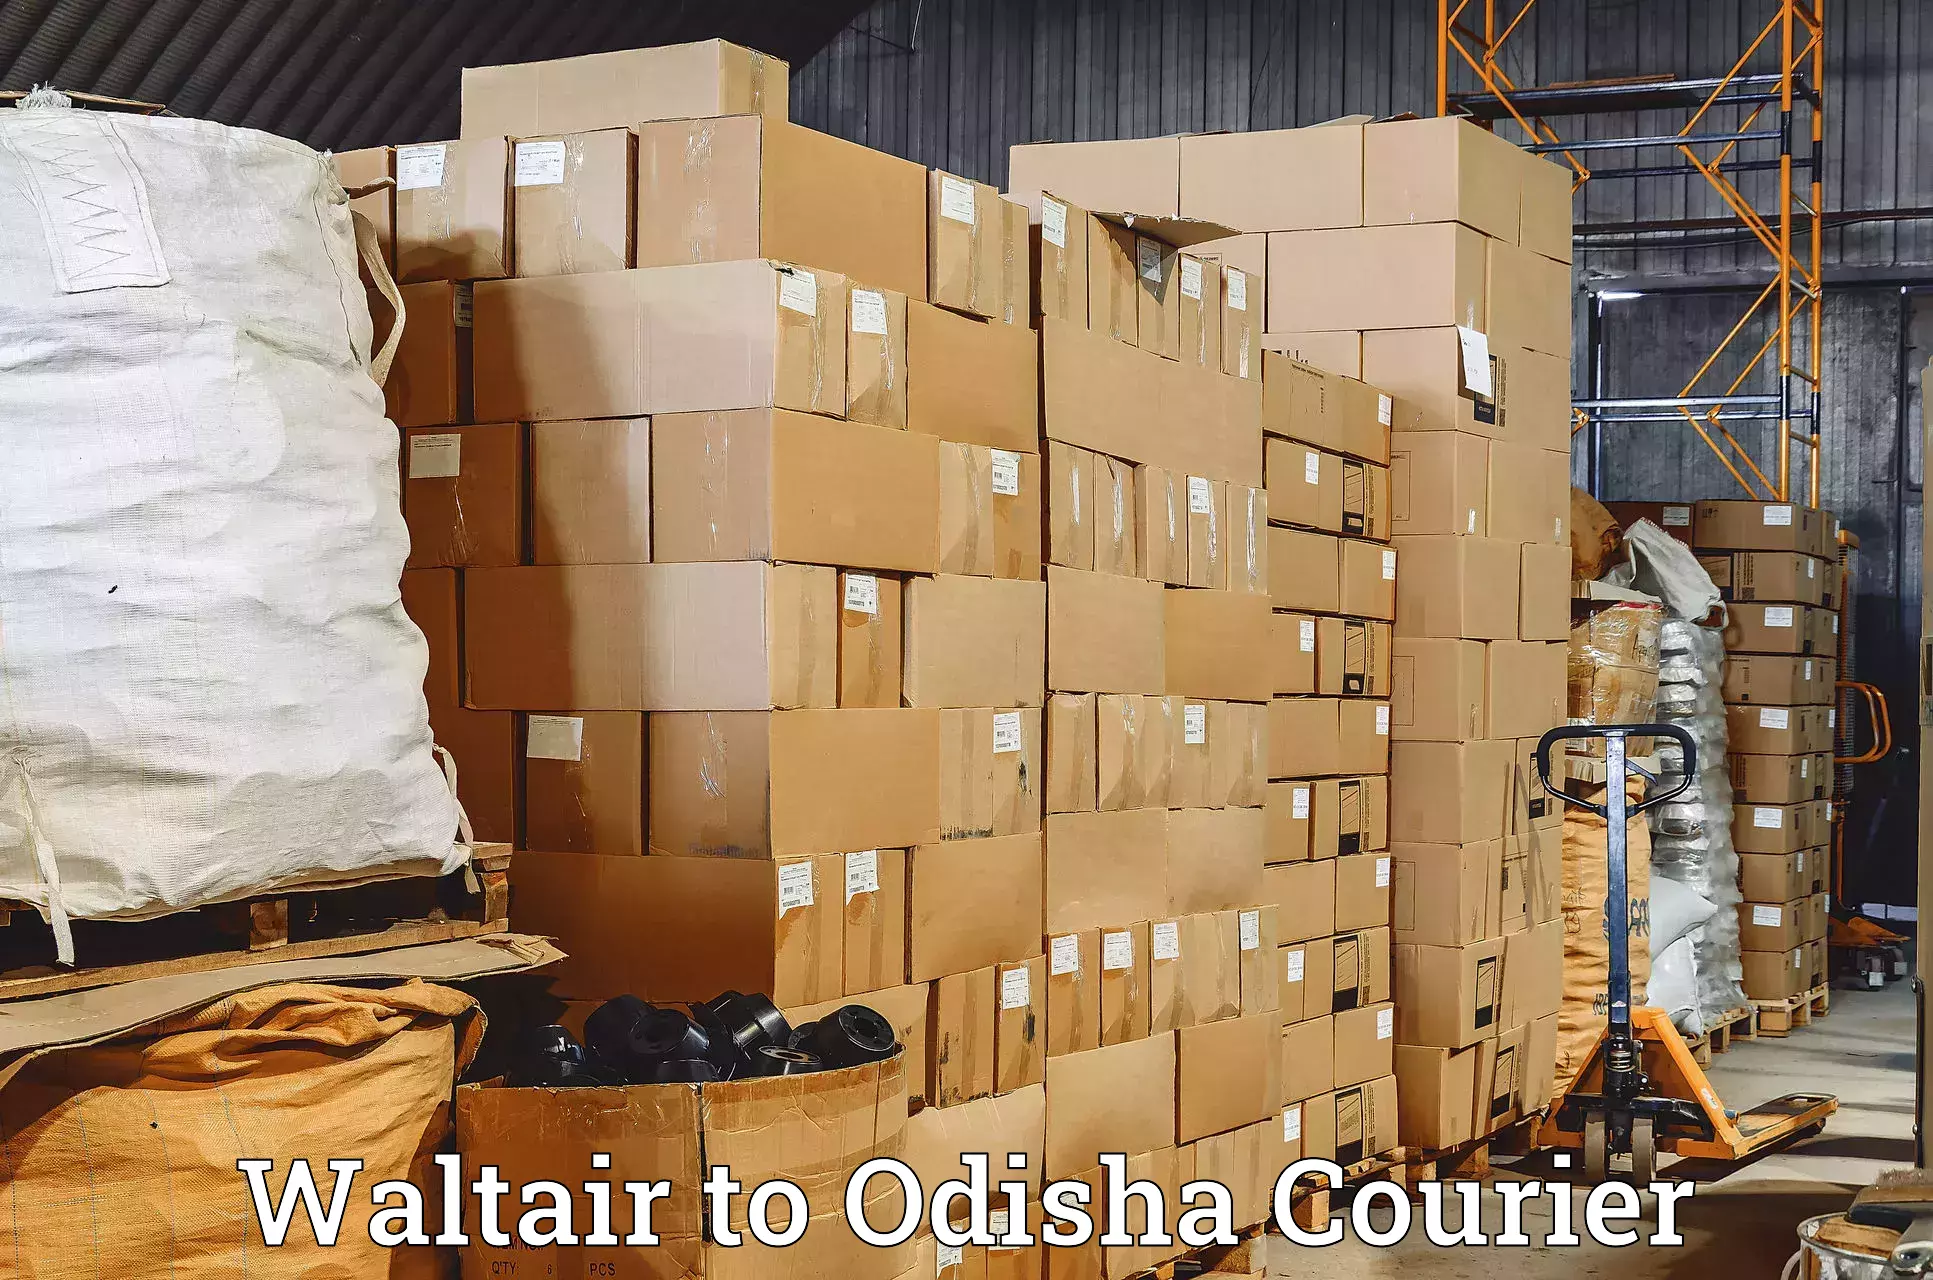 Comprehensive shipping network Waltair to Joda